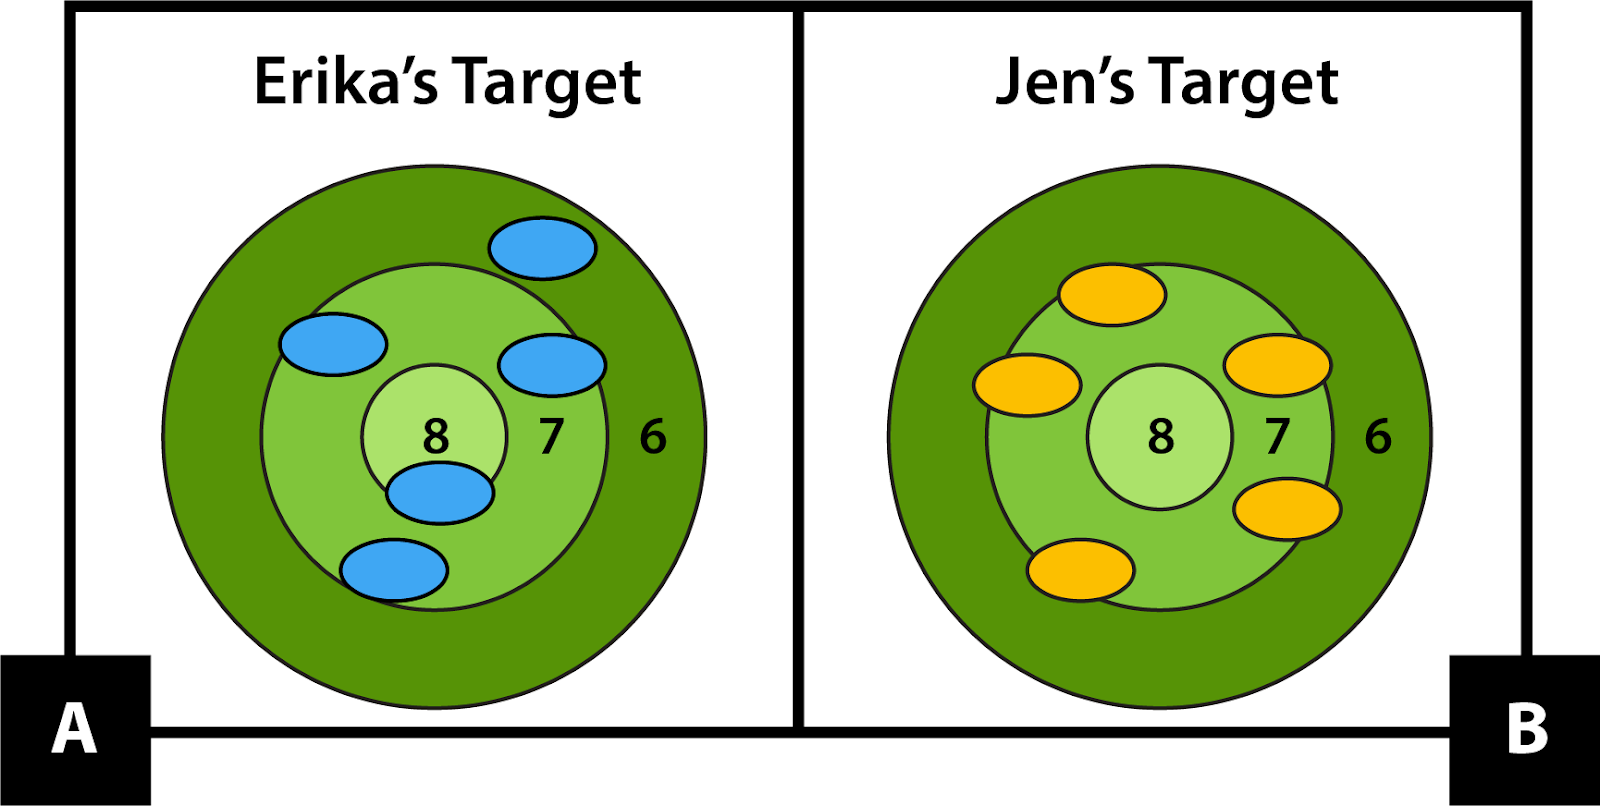 A: Erika's target has 1 beanbag in the 6 point section, 3 beanbags in the 7 point section and 1 beanbag in the 8 point section. B: Jen's target has all 5 beanbags in the 7 point section.